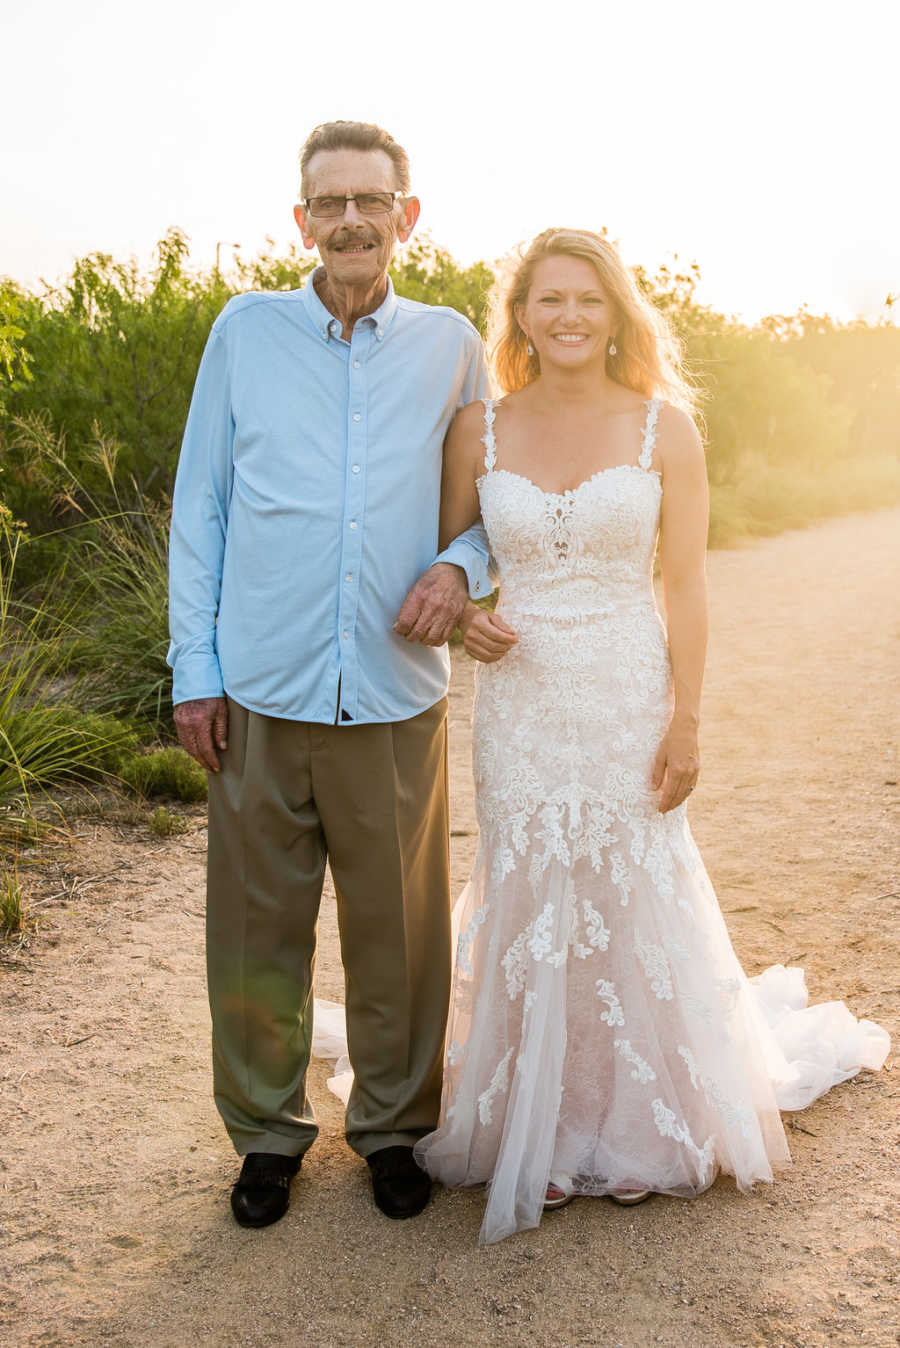 Woman in wedding gown stands arm in arm with father who was diagnosed with cancer